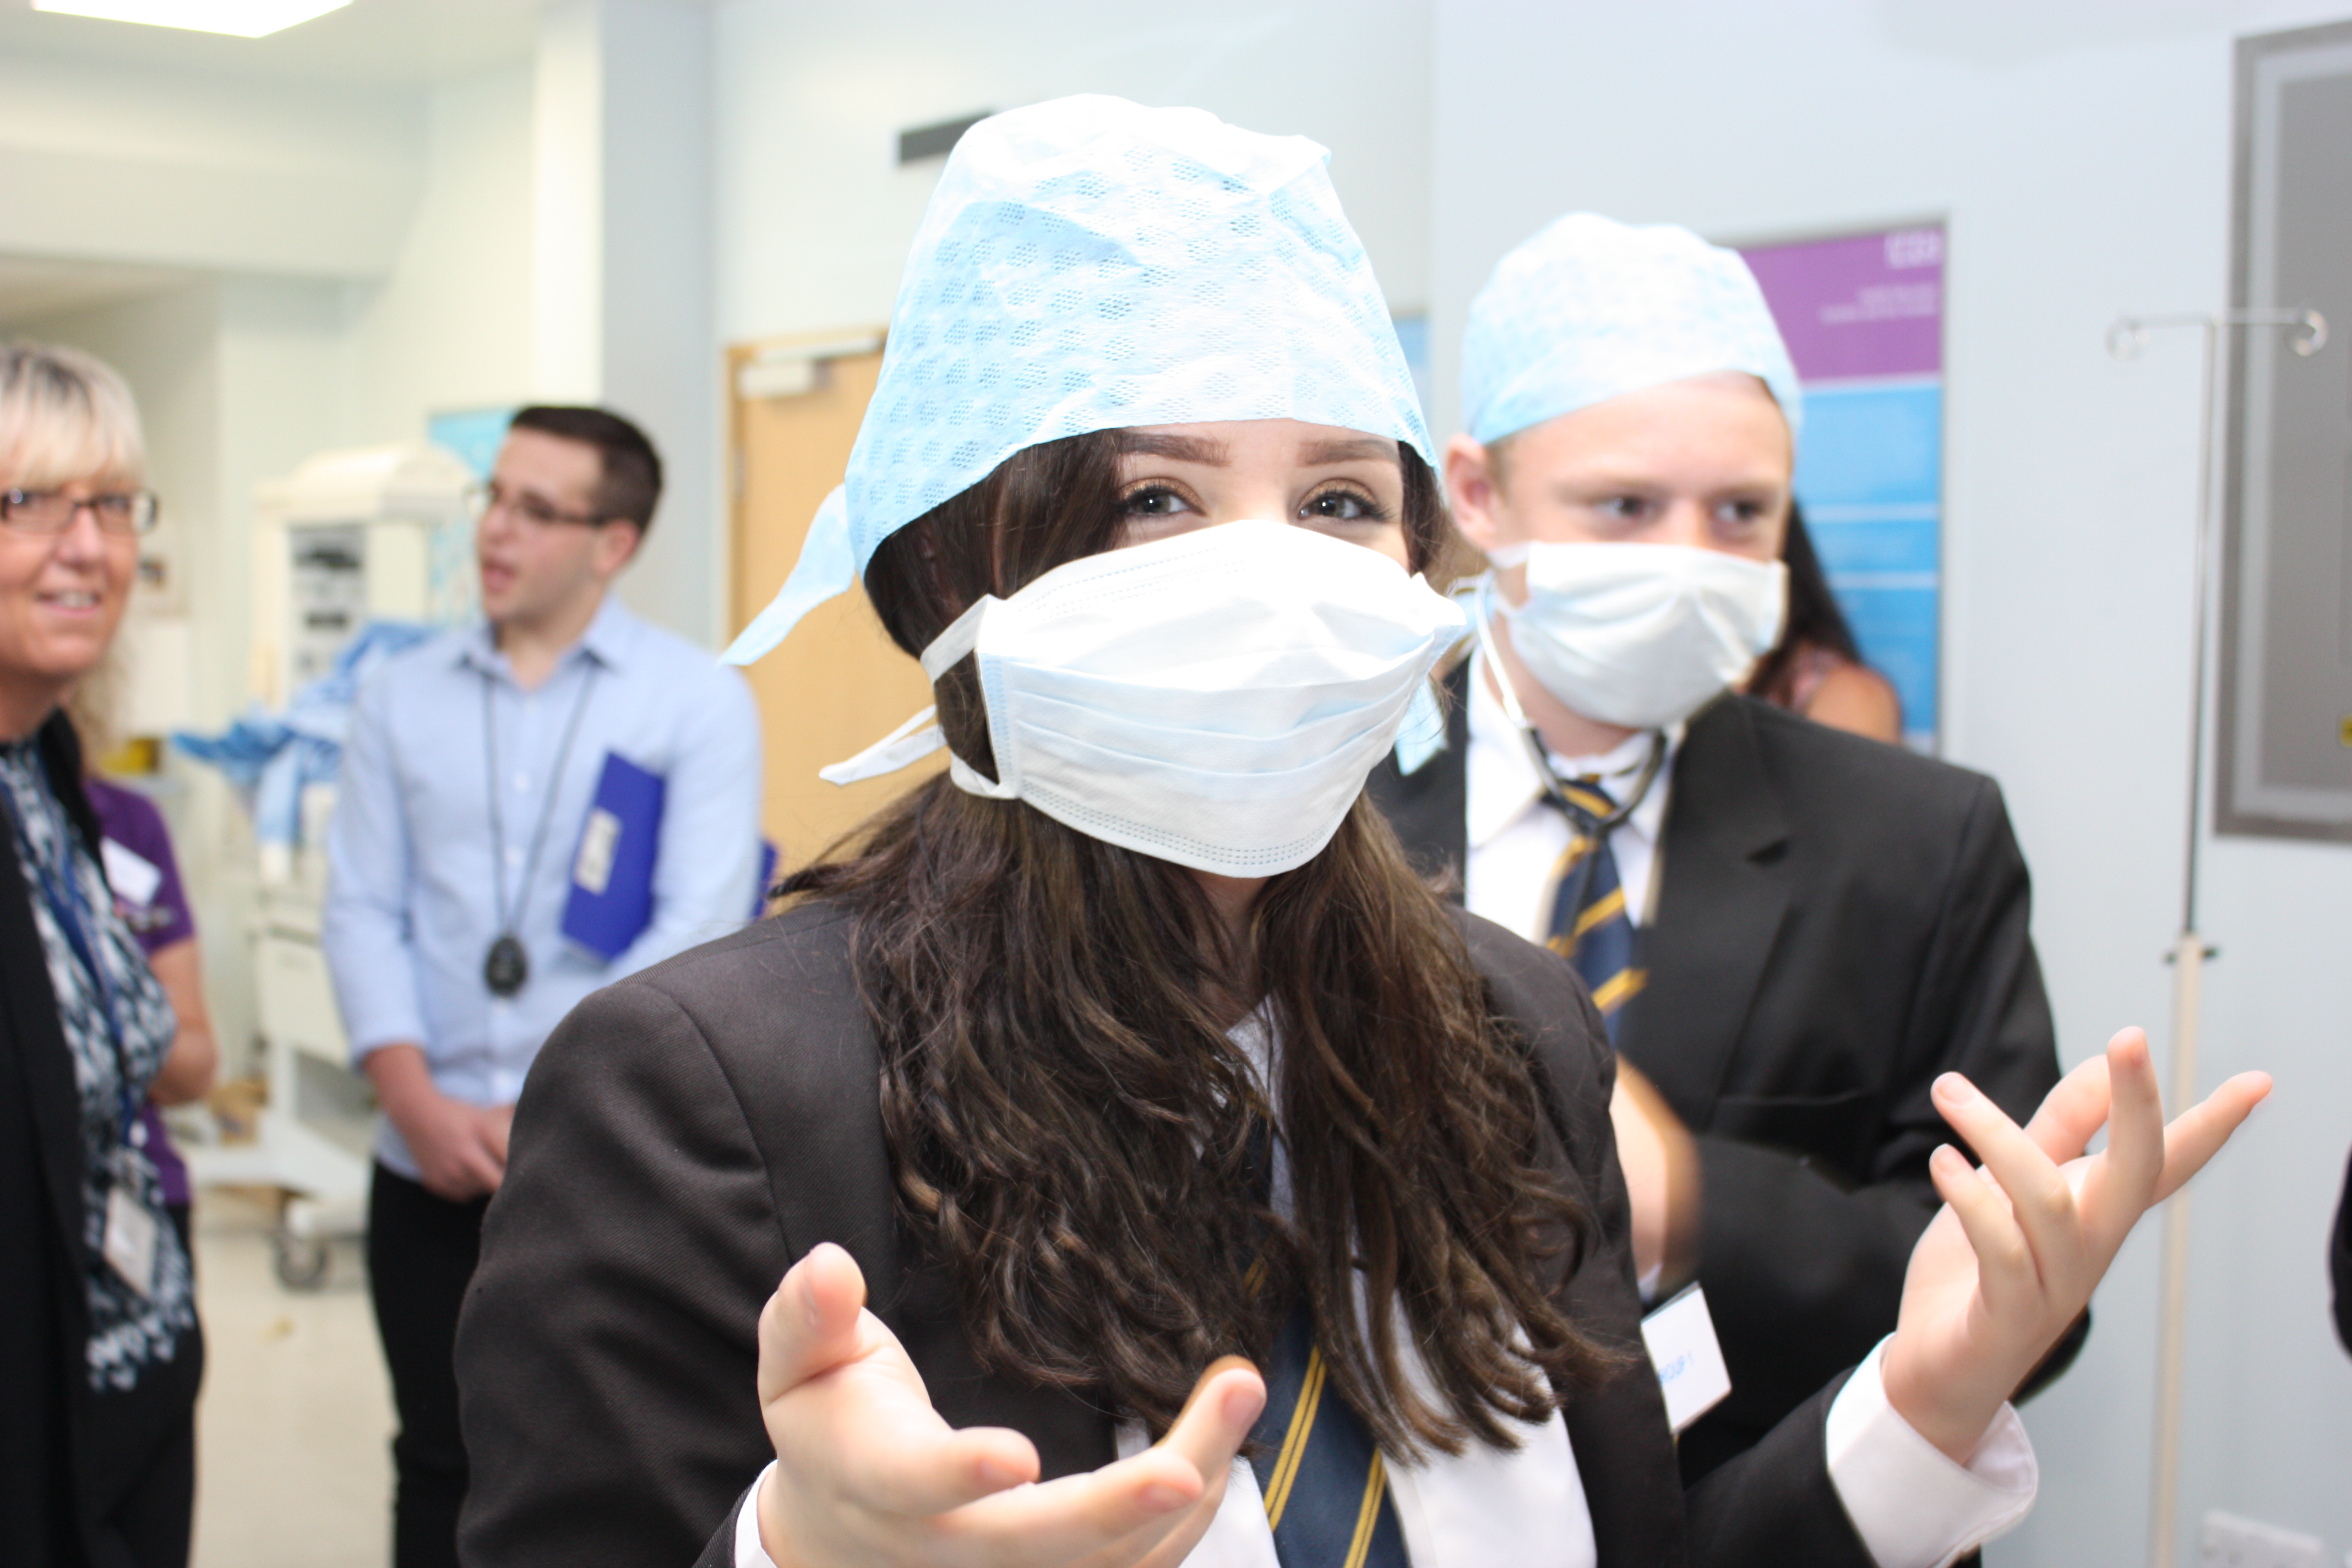 Students to spend 'A day in the life of the NHS